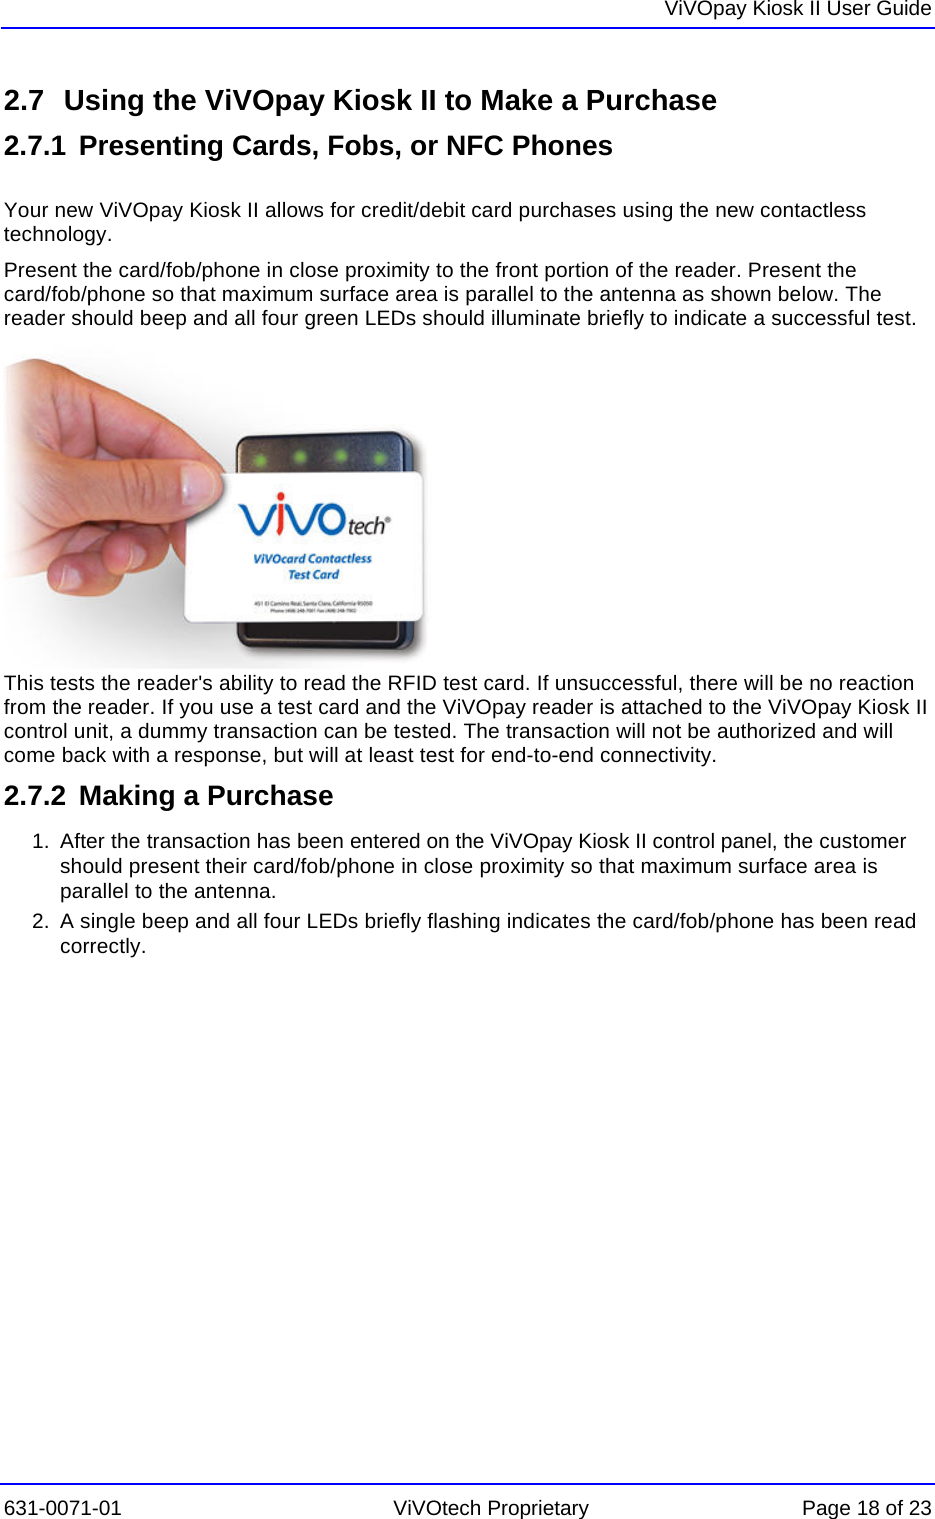   ViVOpay Kiosk II User Guide  631-0071-01 ViVOtech Proprietary Page 18 of 23 2.7  Using the ViVOpay Kiosk II to Make a Purchase 2.7.1  Presenting Cards, Fobs, or NFC Phones  Your new ViVOpay Kiosk II allows for credit/debit card purchases using the new contactless technology. Present the card/fob/phone in close proximity to the front portion of the reader. Present the card/fob/phone so that maximum surface area is parallel to the antenna as shown below. The reader should beep and all four green LEDs should illuminate briefly to indicate a successful test.          This tests the reader&apos;s ability to read the RFID test card. If unsuccessful, there will be no reaction from the reader. If you use a test card and the ViVOpay reader is attached to the ViVOpay Kiosk II control unit, a dummy transaction can be tested. The transaction will not be authorized and will come back with a response, but will at least test for end-to-end connectivity.  2.7.2  Making a Purchase 1.  After the transaction has been entered on the ViVOpay Kiosk II control panel, the customer should present their card/fob/phone in close proximity so that maximum surface area is parallel to the antenna.  2.  A single beep and all four LEDs briefly flashing indicates the card/fob/phone has been read correctly.  